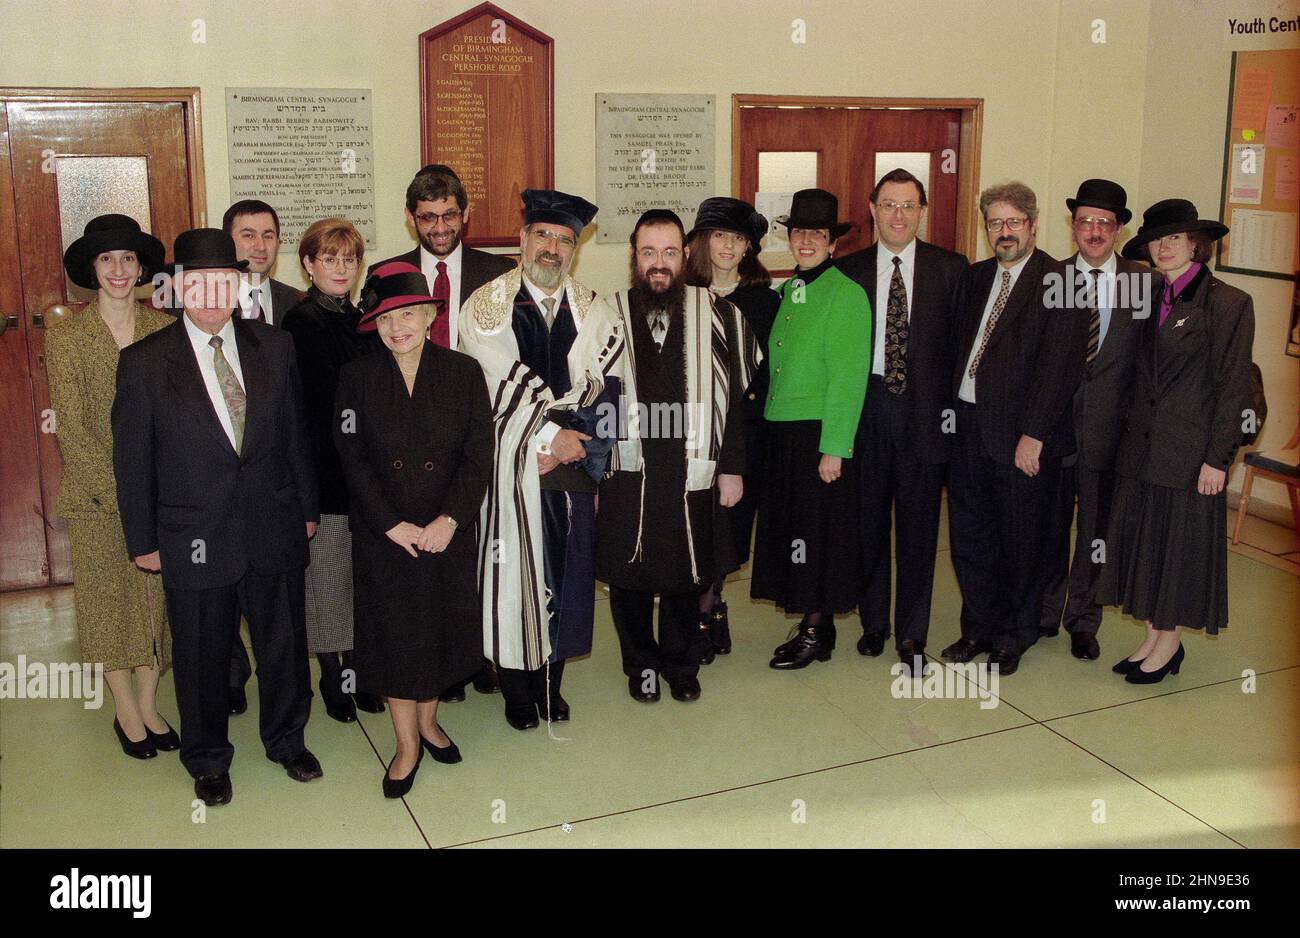 The Induction of Rabbi Chaim Rapoport by the Chief Rabbi Jonathan Sacks at the Birmingham Central Synagogue on 05 November 1995. Officials of the congregation included the president Lenny Jacobs, Mr Sam Cohen, Dr Charles Zuckerman, Mr Mike Yarm, Mr Geoffrey Clements and the Rev Meir Lev and their wives including Mrs Ruth Jacobs Stock Photo